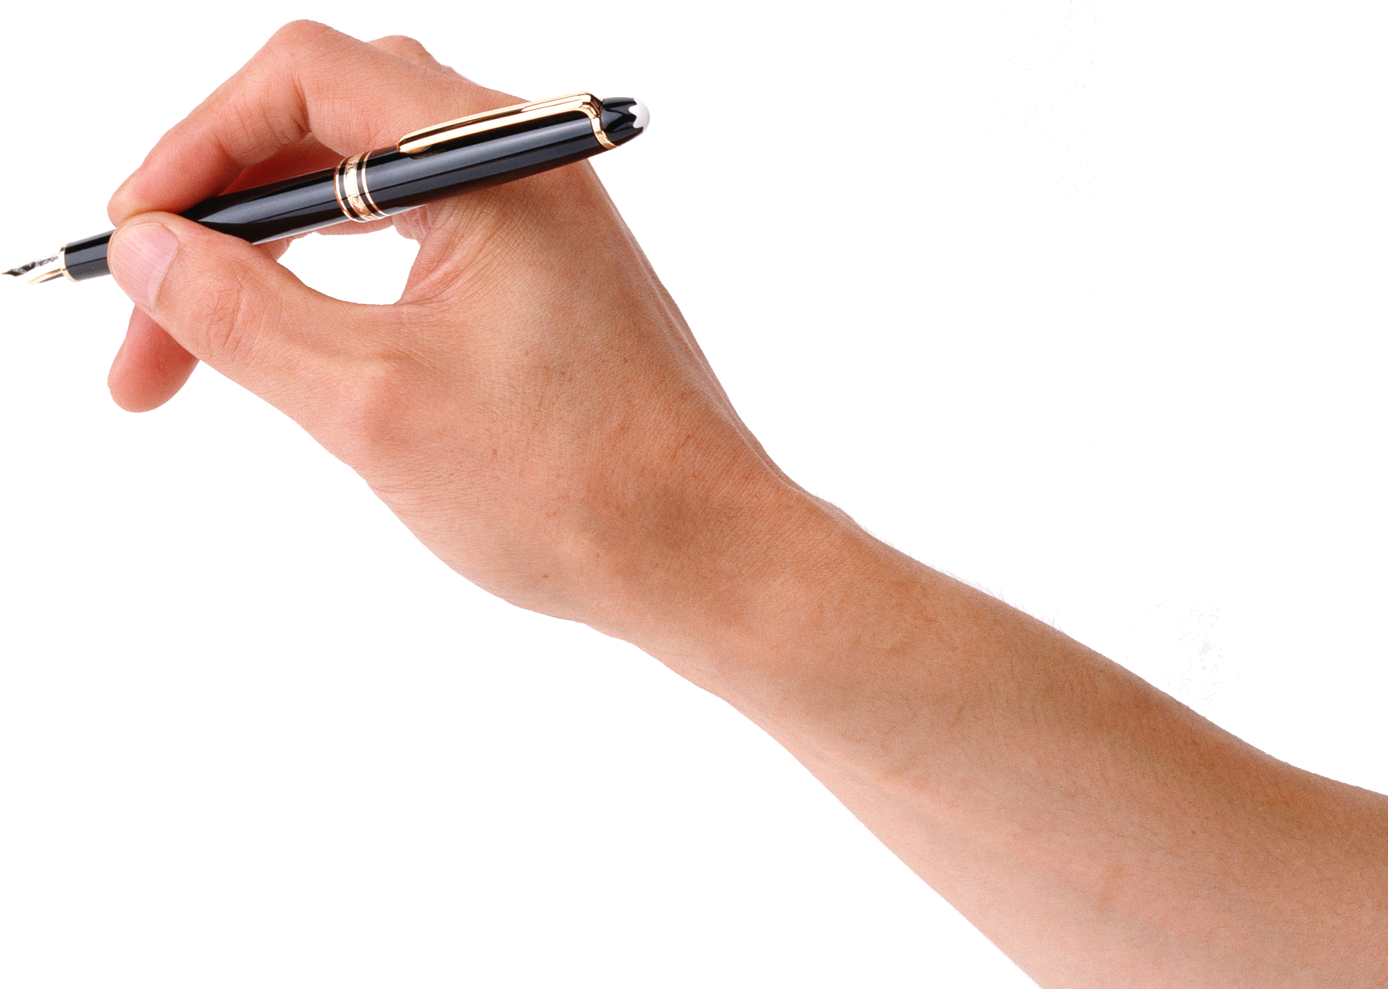 Download Pen On Hand PNG Image for Free